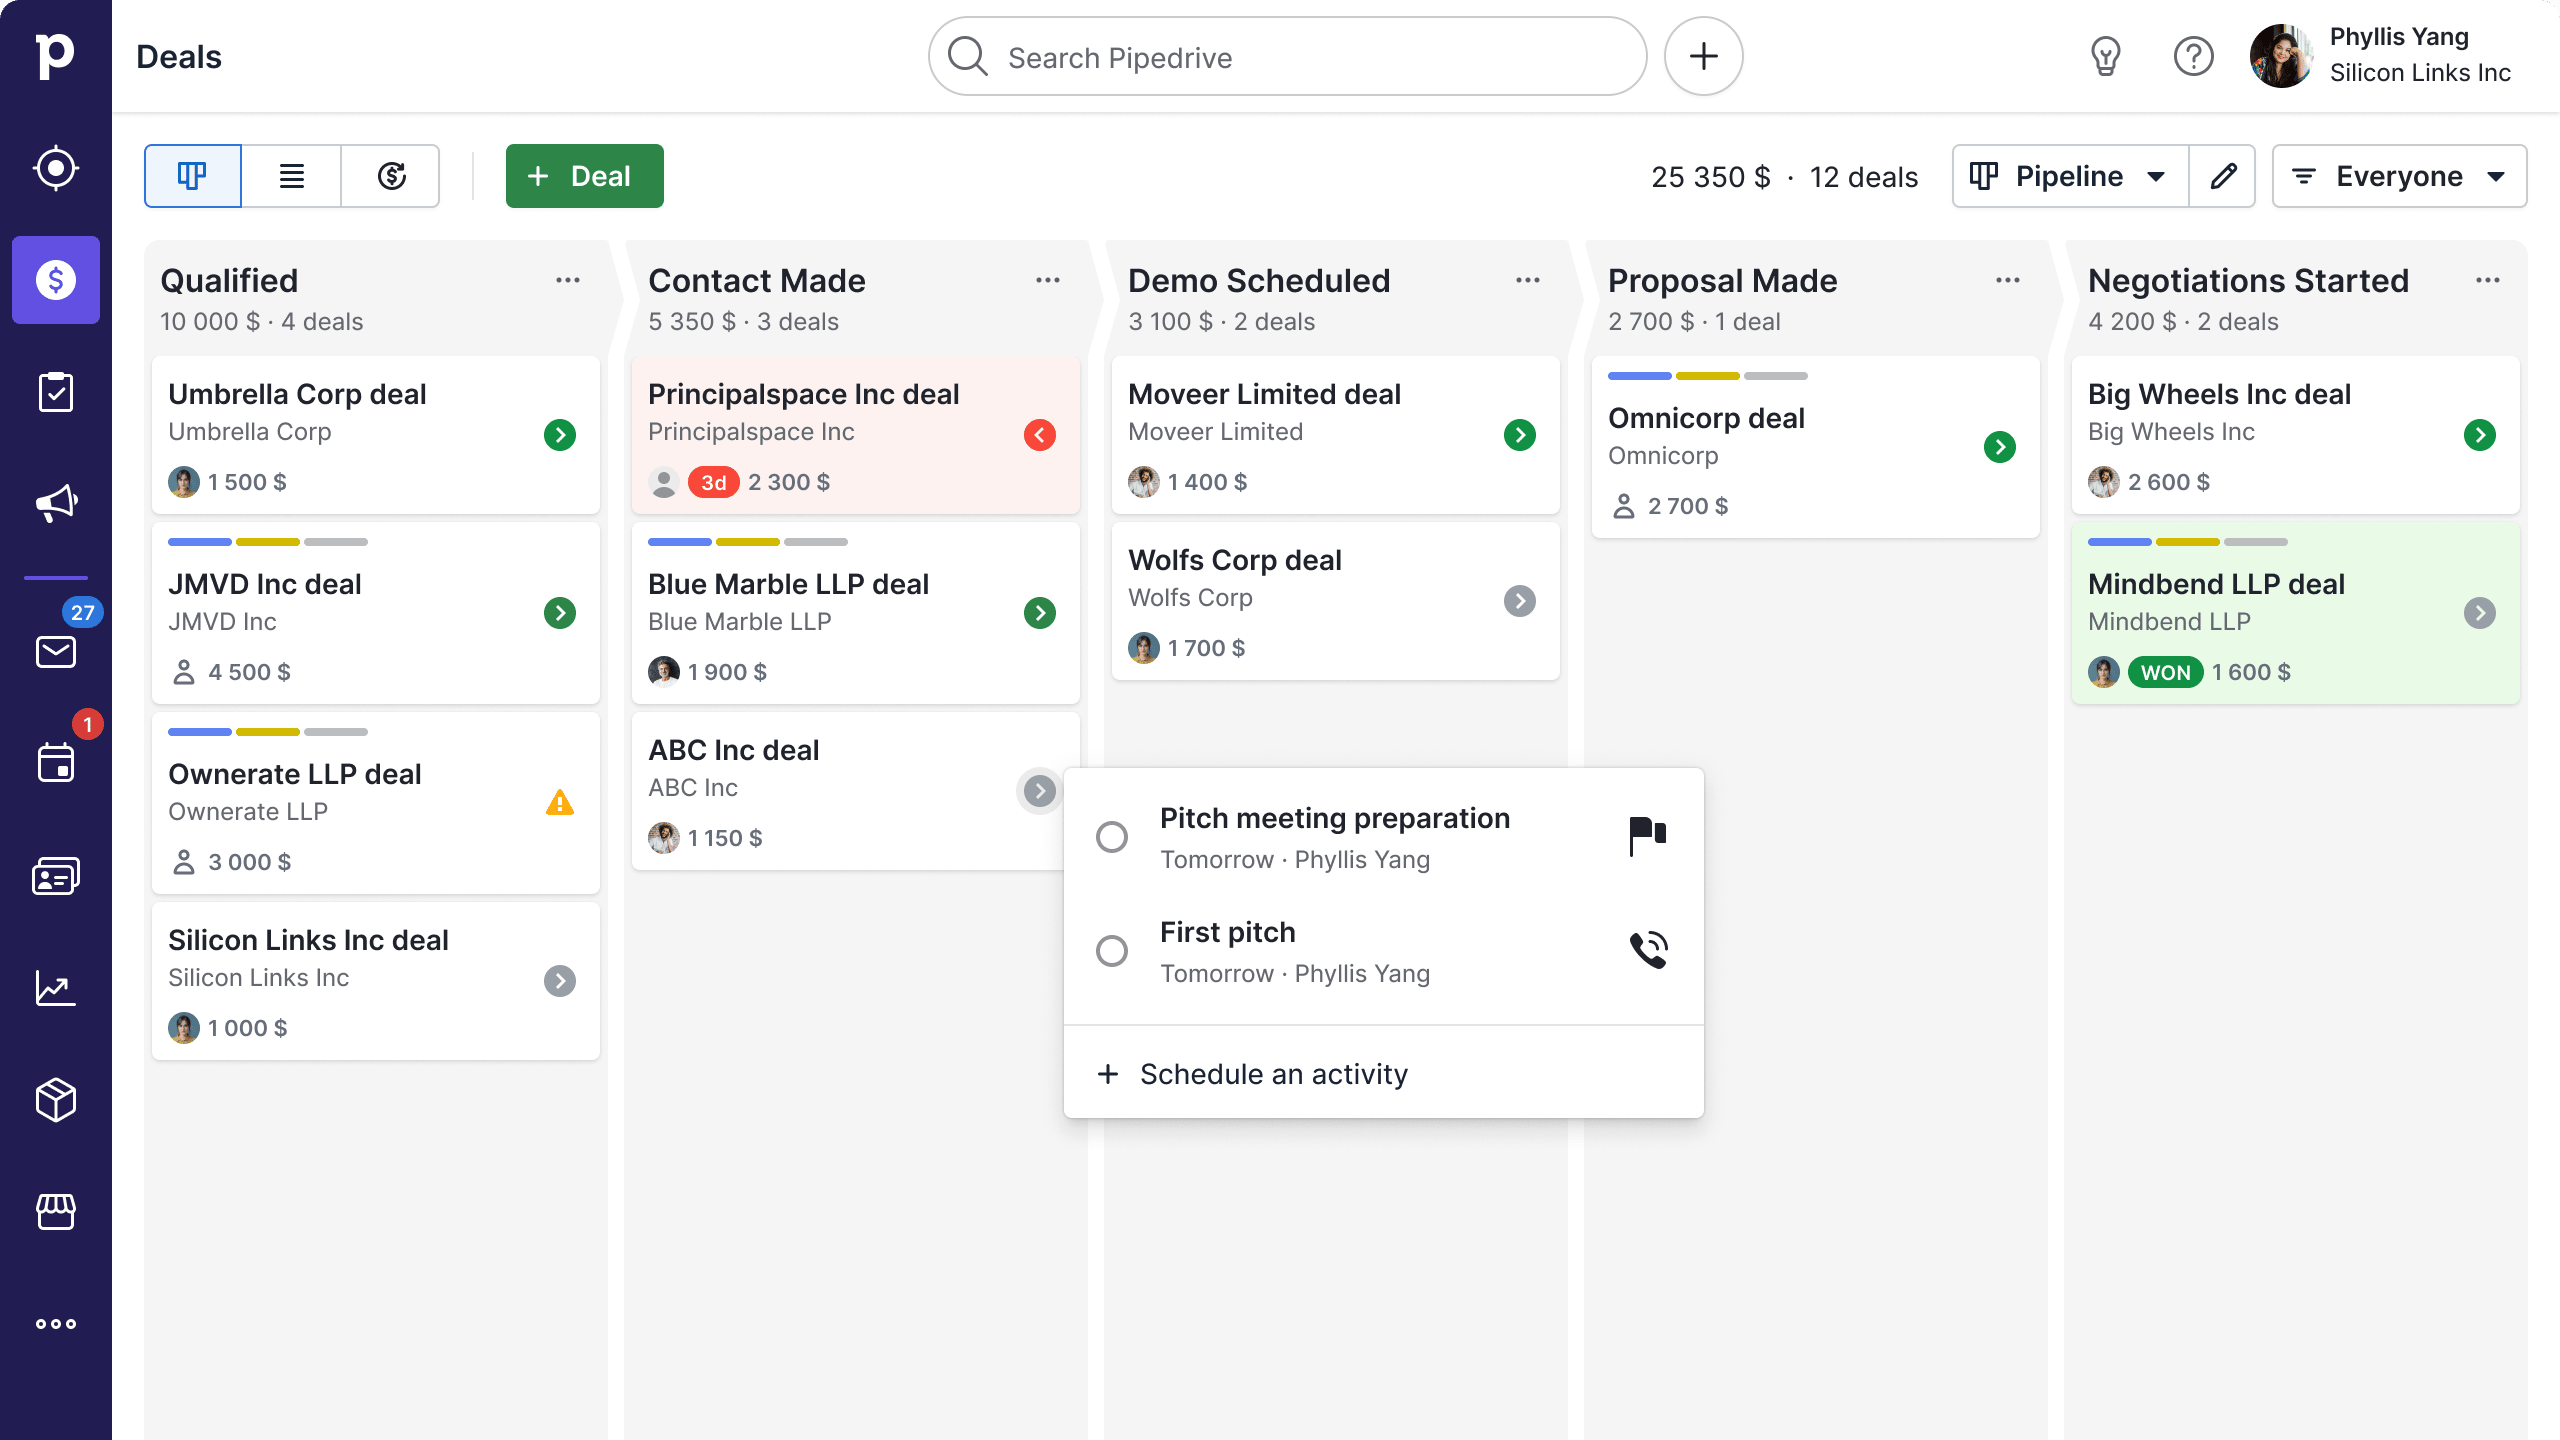 interface do Pipedrive
